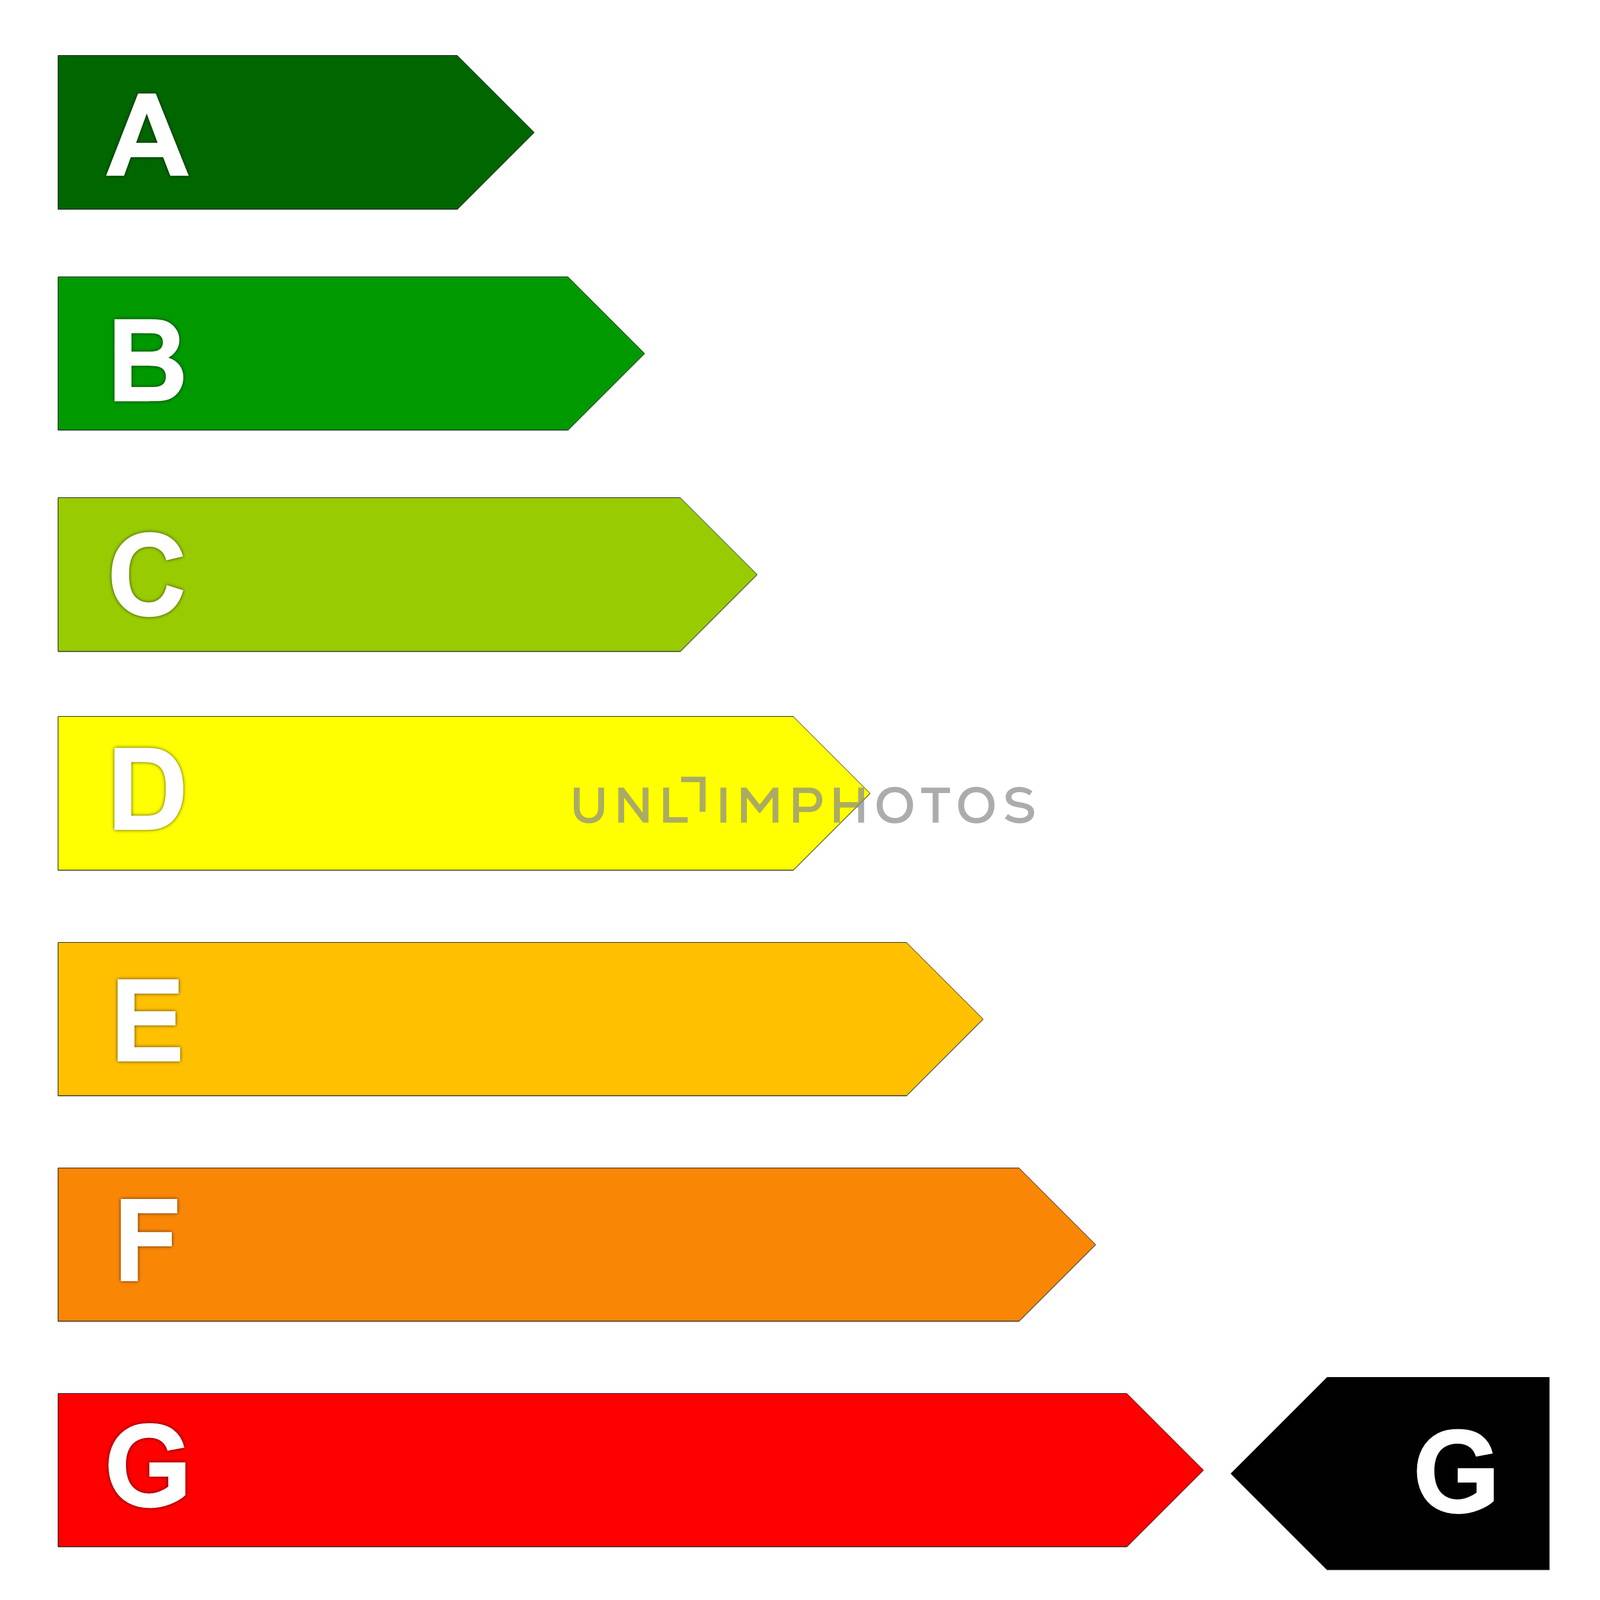 Energy efficency scale from dark green A to red G in white background